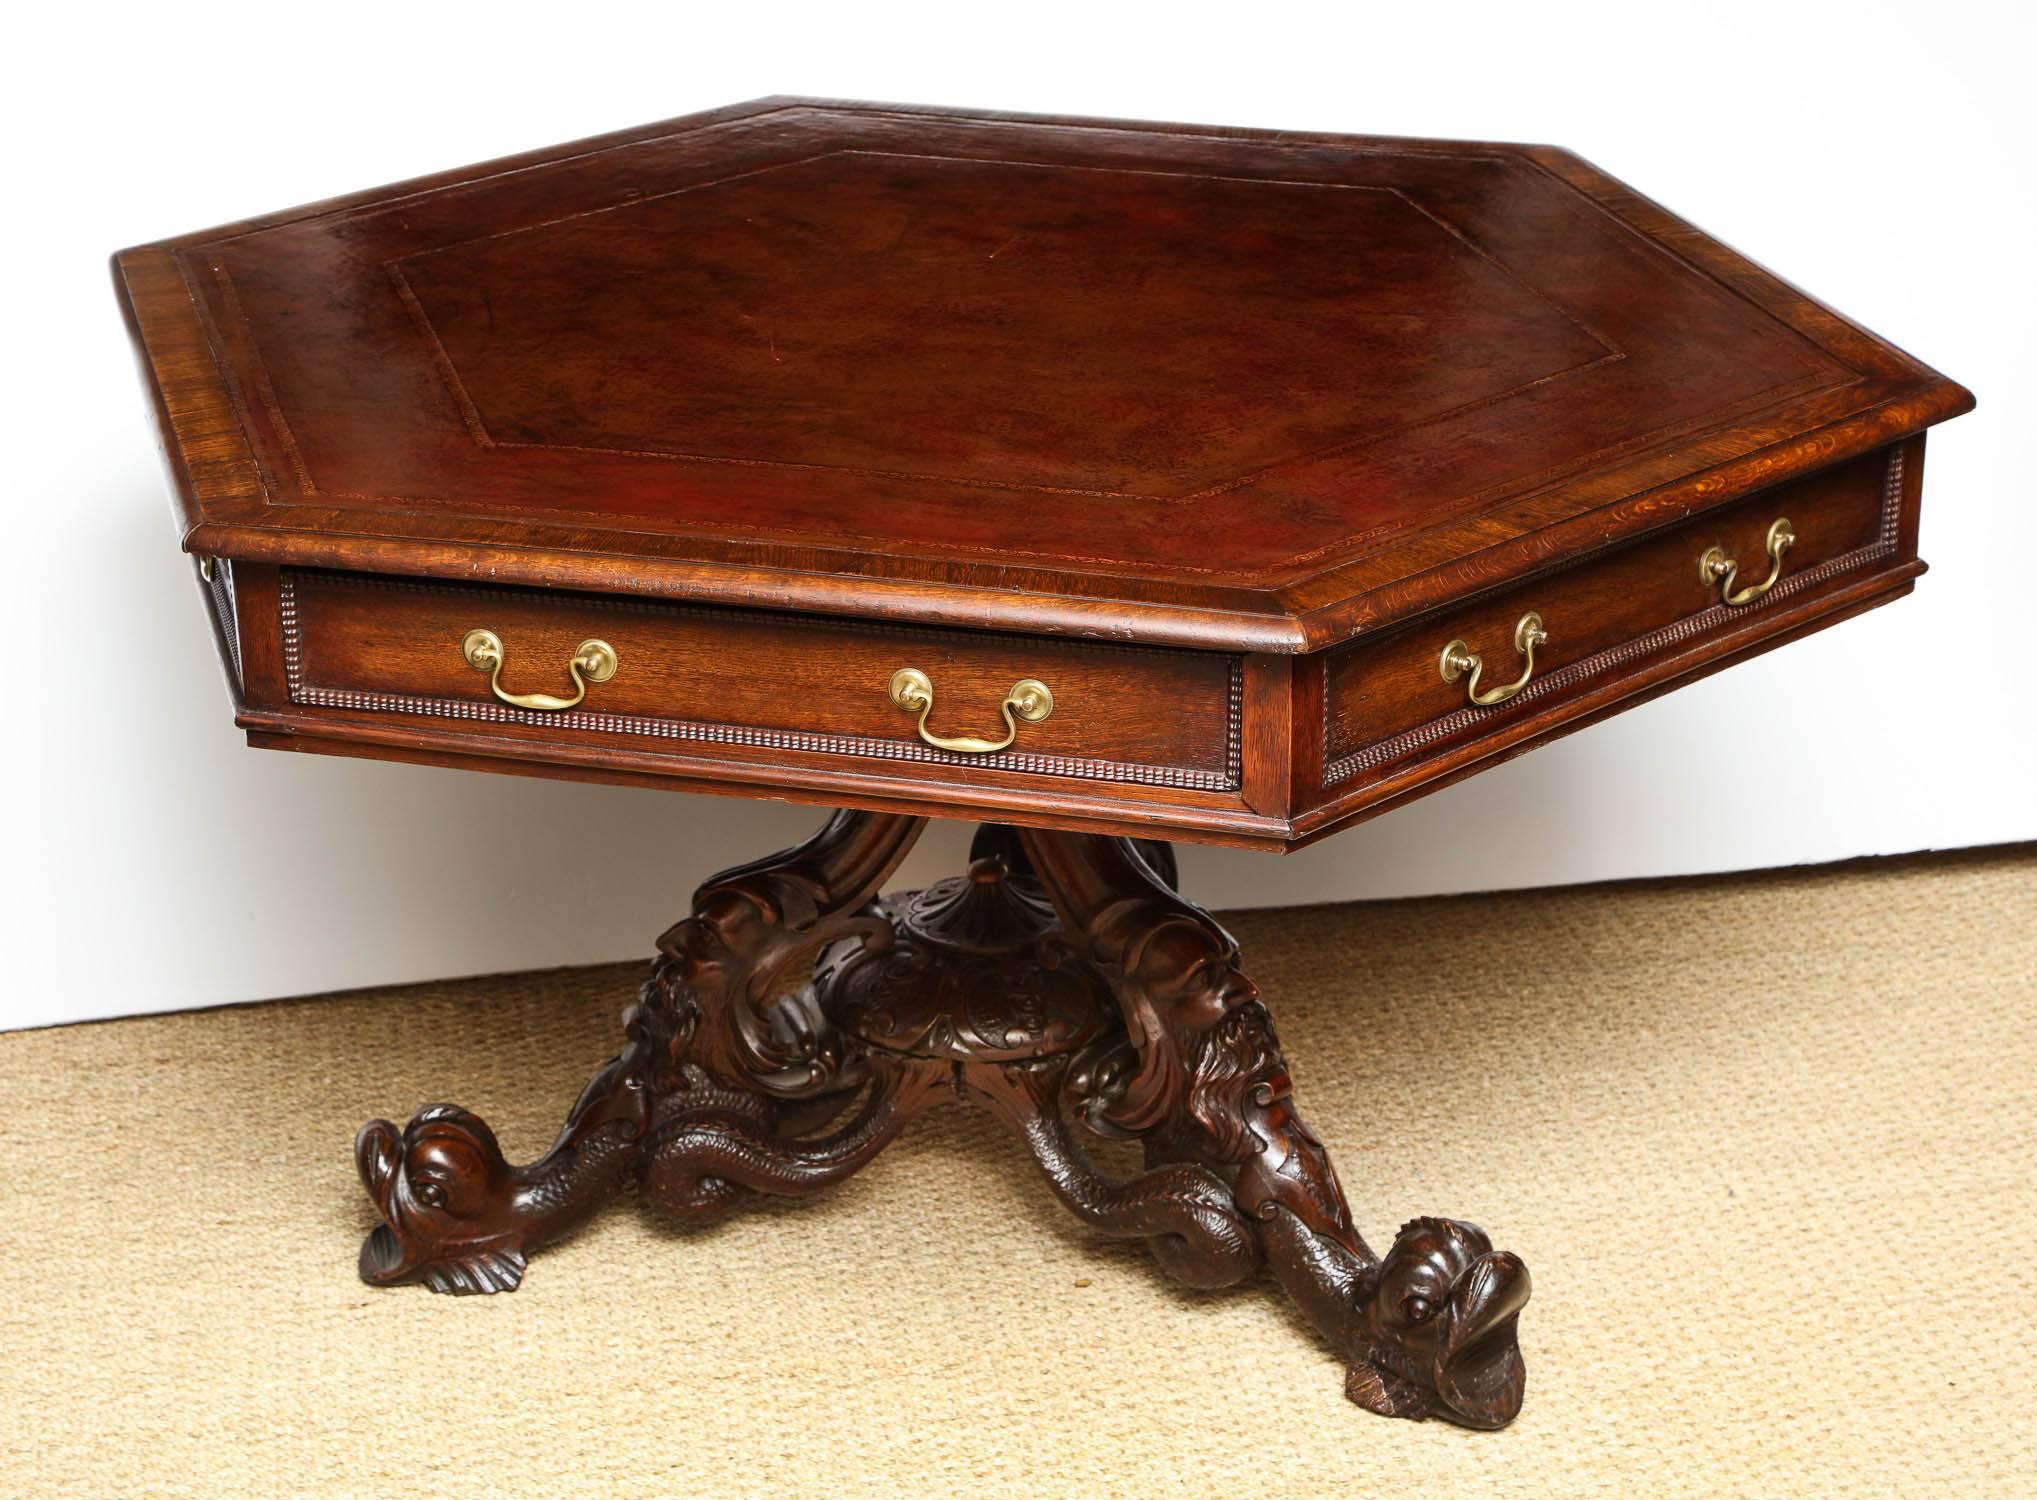 Mid-19th century English hexagonal library table by T. H. Filmer & Sons, London circa 1840, the gilt tooled Morocco leather top over three working and three dummy drawers with ripple moldings, the base carved with the head of Aeolus on dolphin